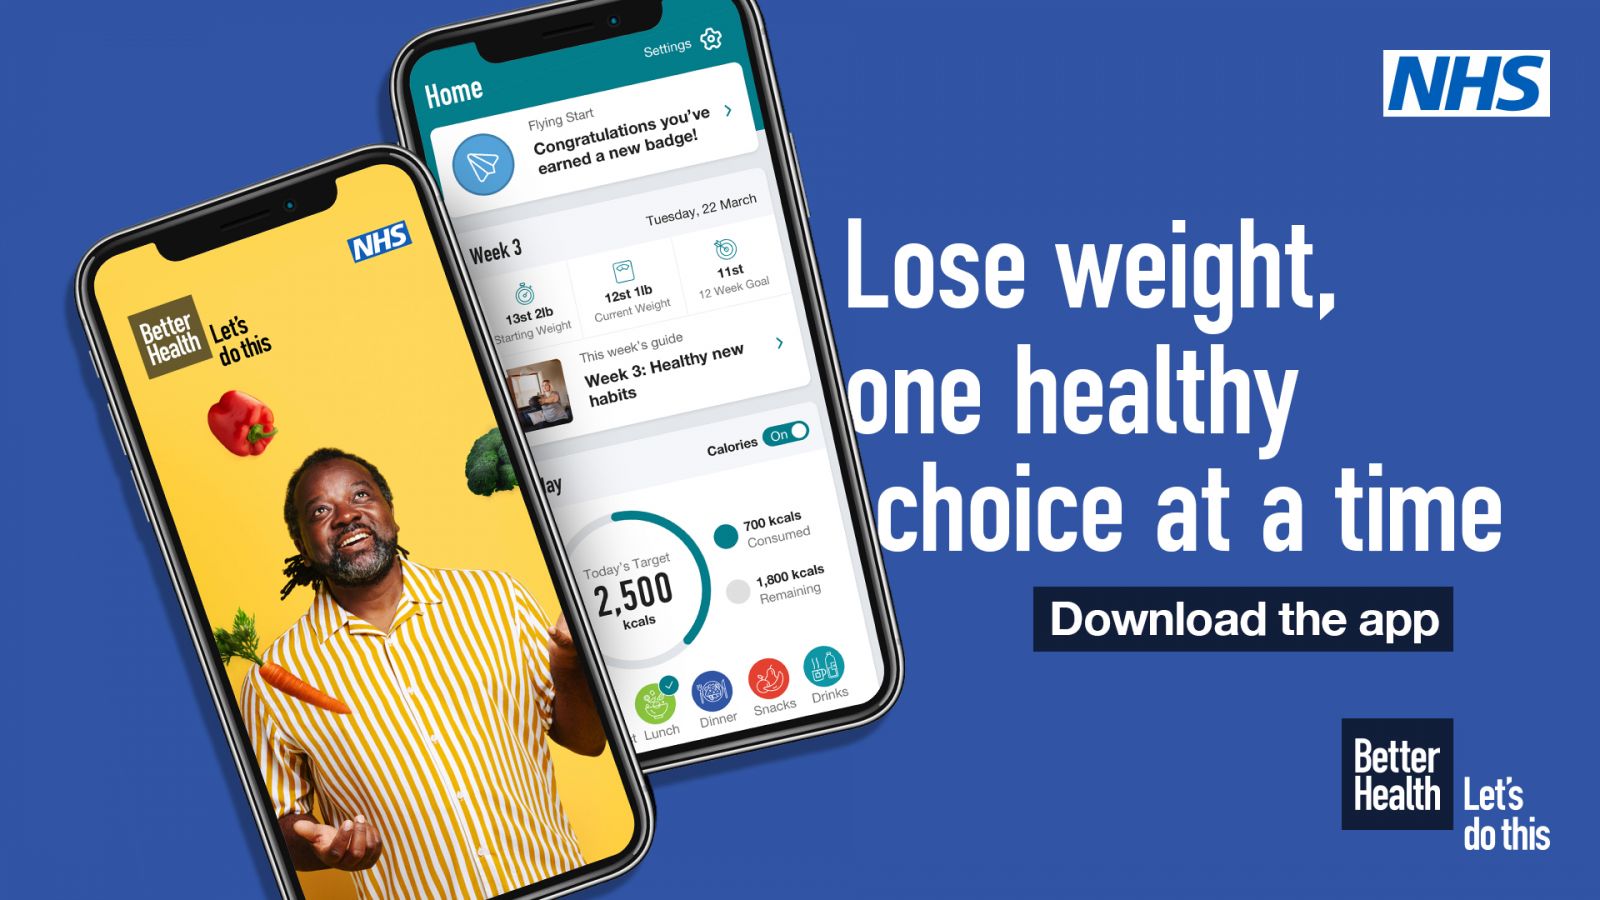 Lose weight, one healthy choice at a time. Download the app